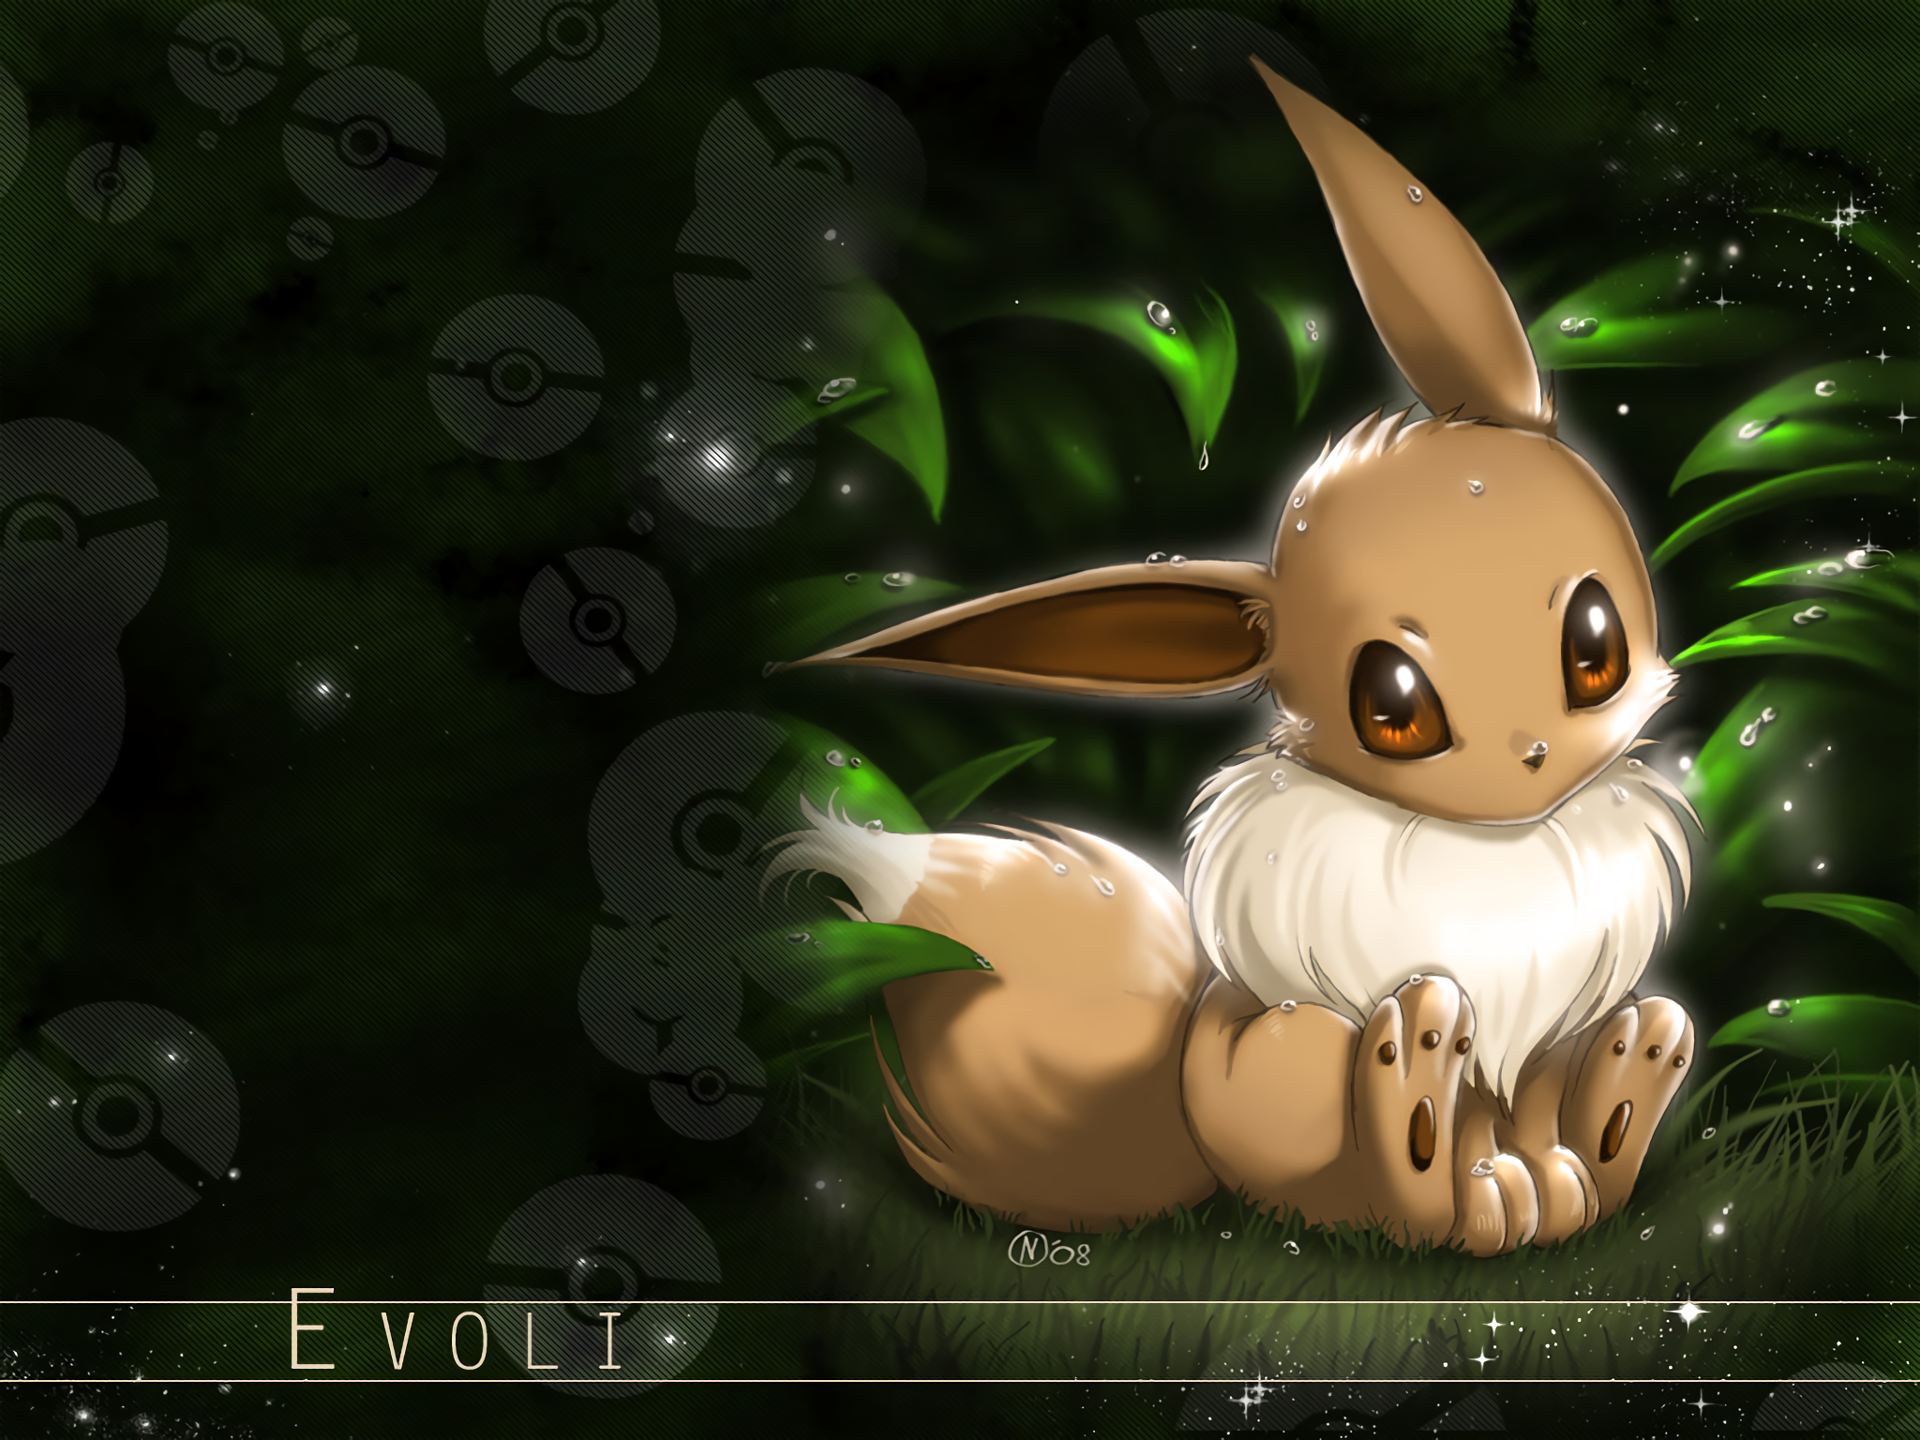 80+ Eevee (Pokémon) HD Wallpapers and Backgrounds